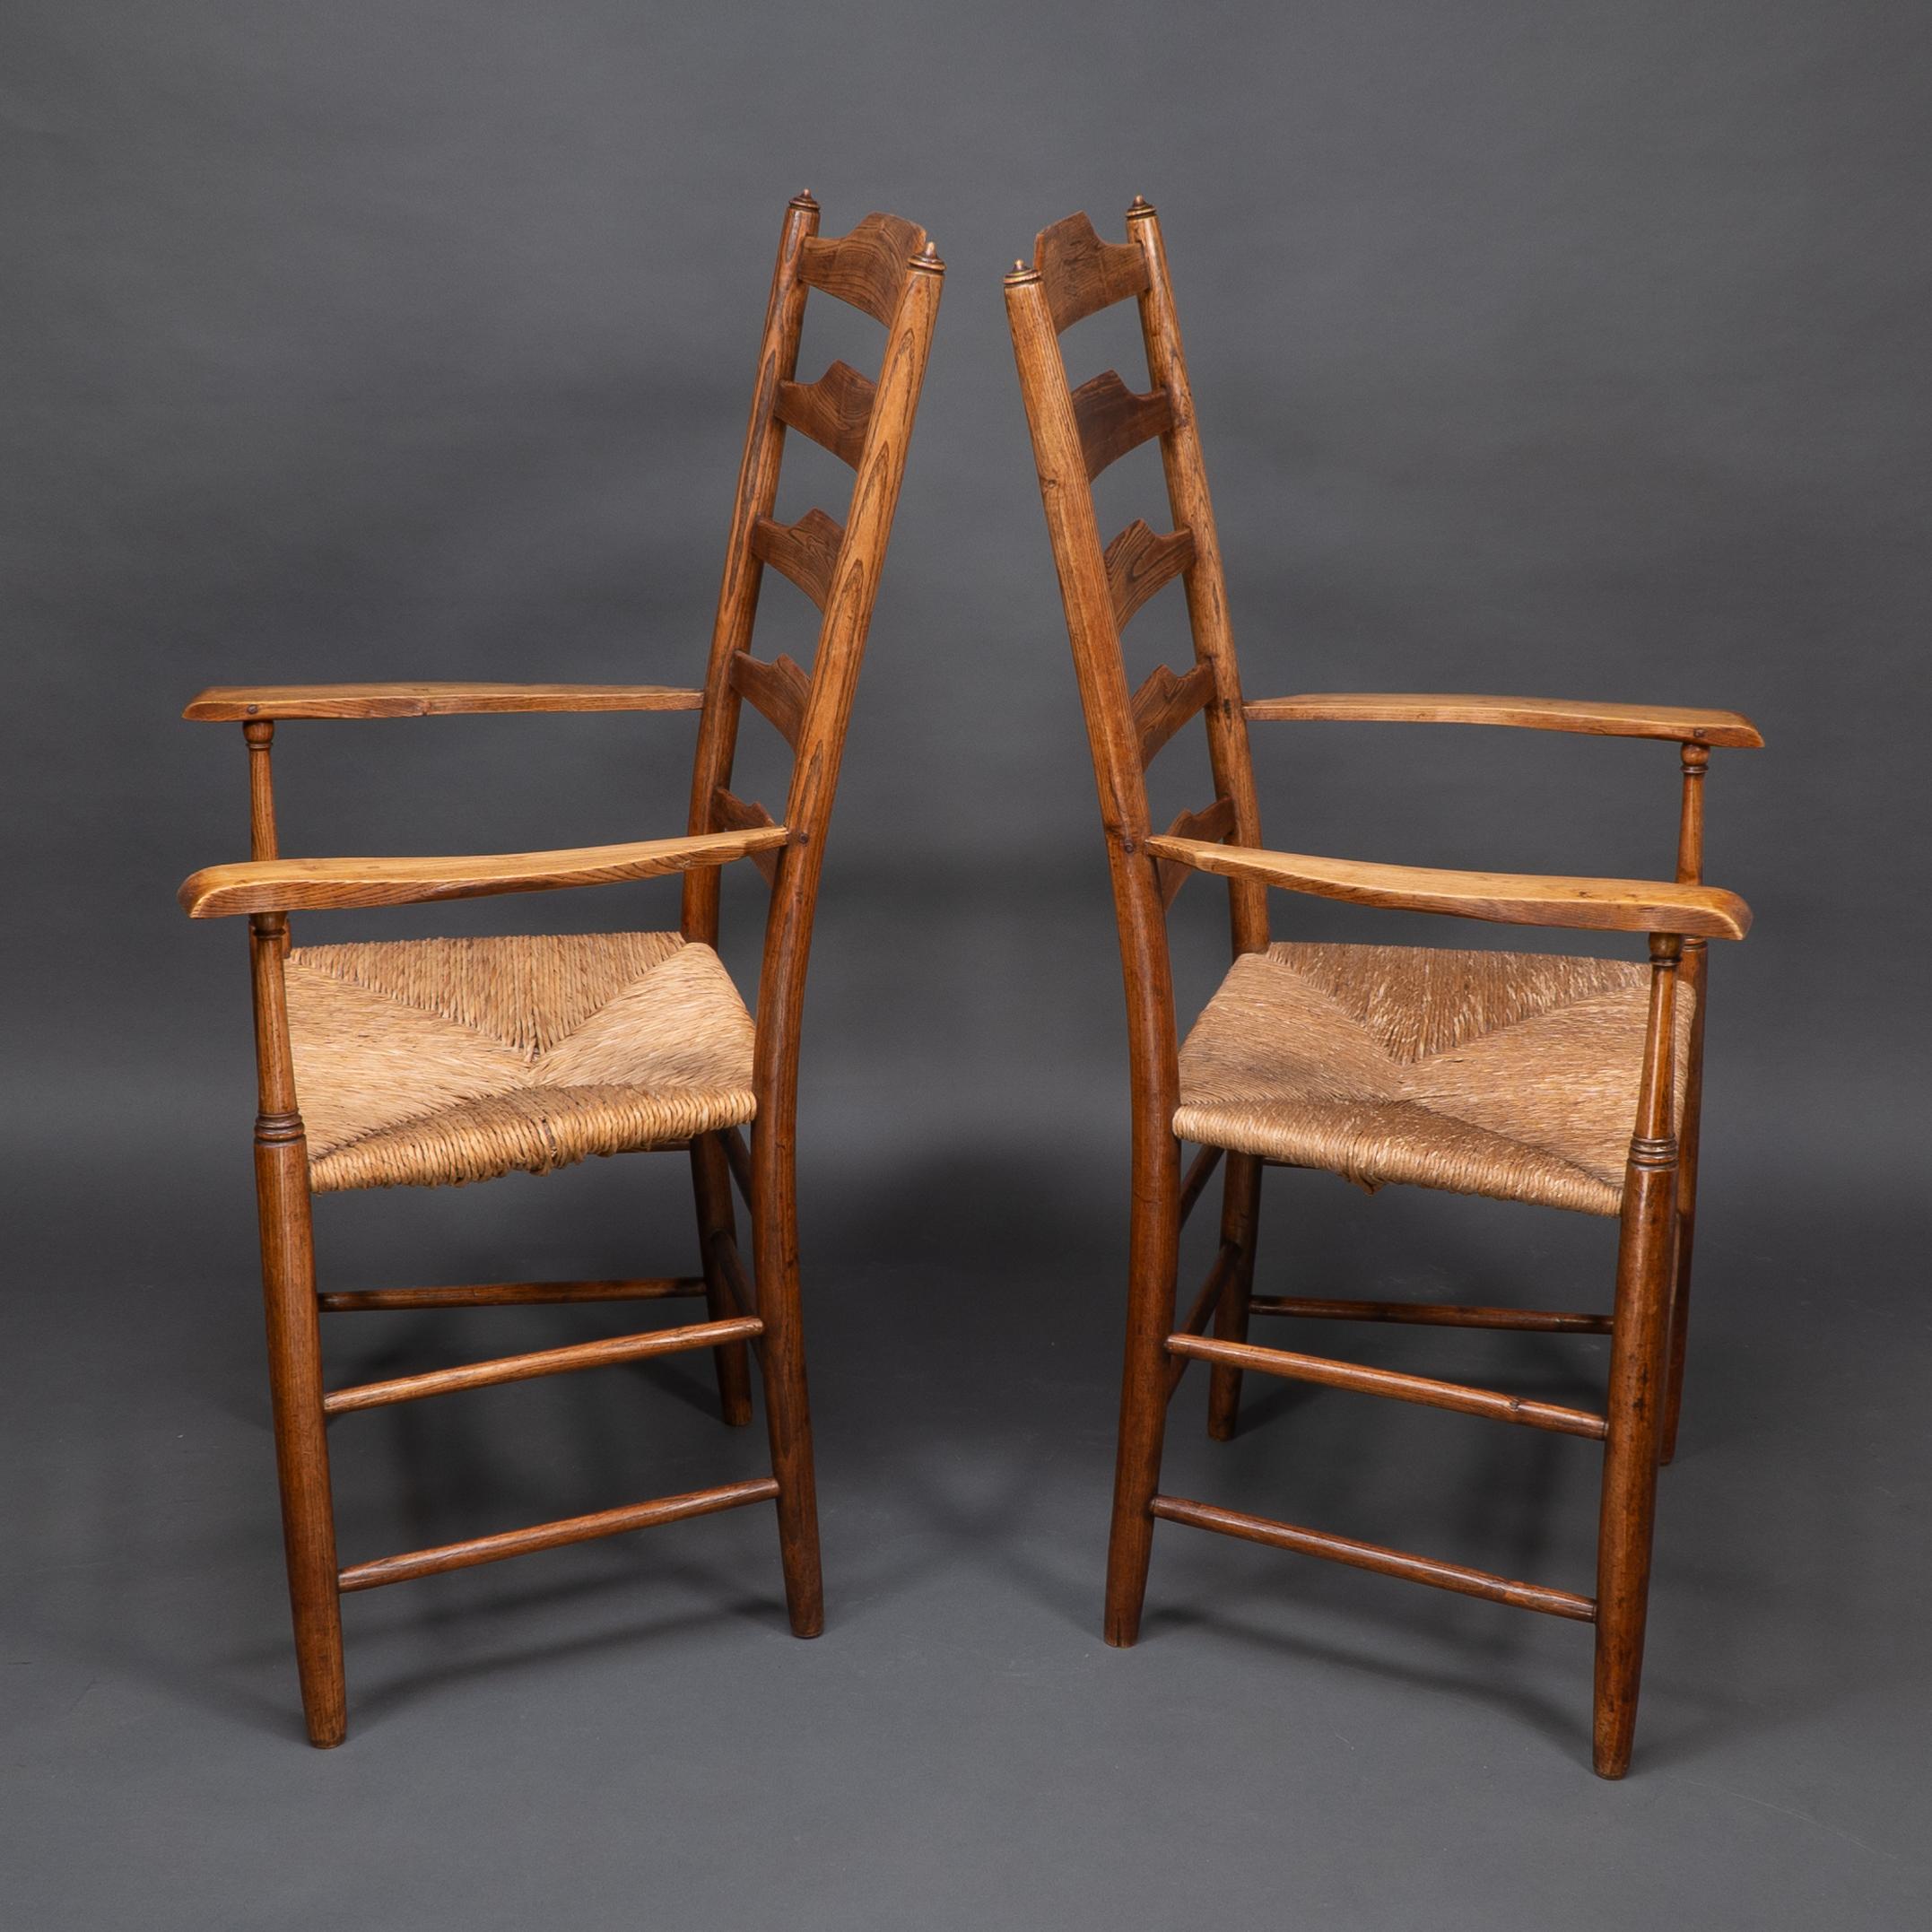 Philip Clissett A fine set of four early Arts & Crafts ash ladder back armchairs For Sale 8